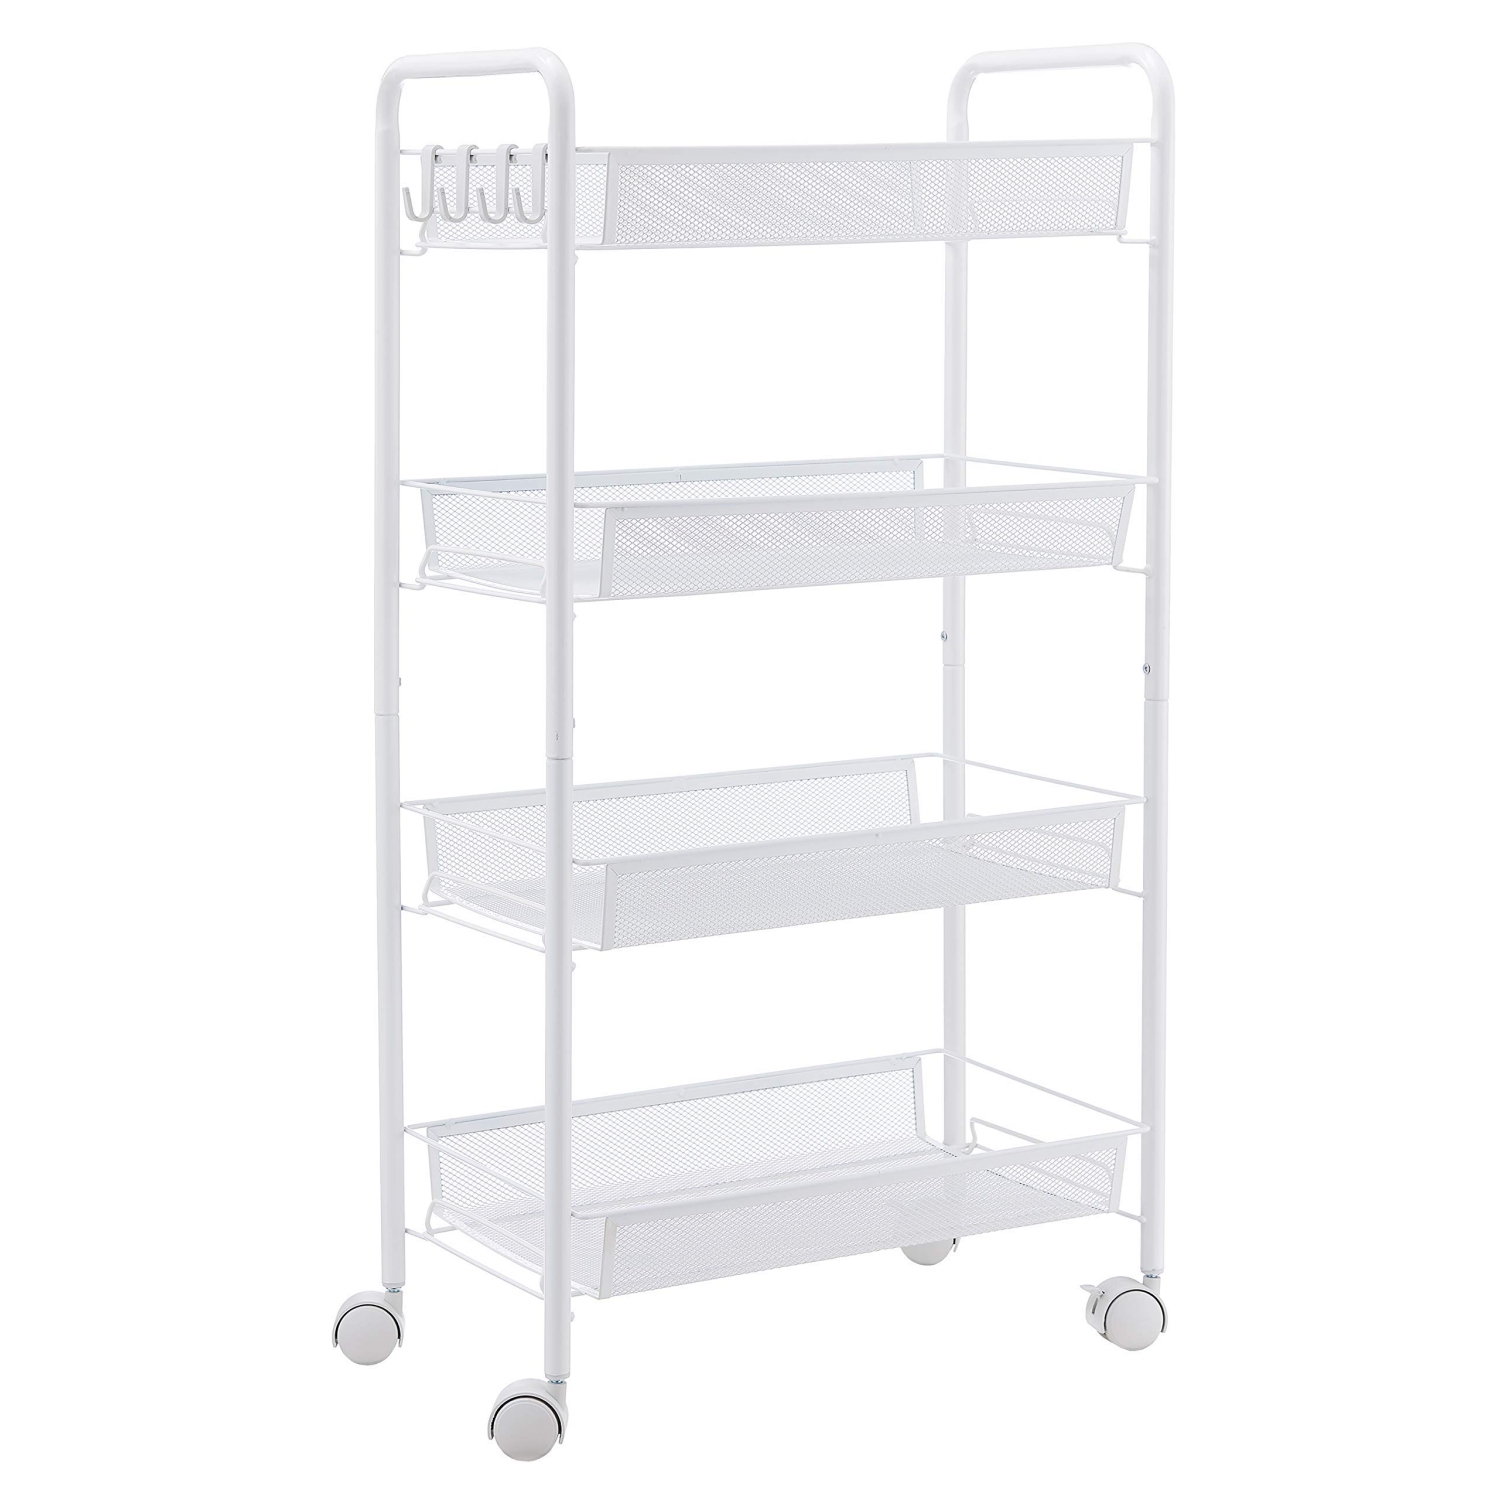 4-Tier Rolling Storage Rack Cart Organizer, Utility Mobile Metal Mesh Trolley with Wire Basket Shelving, Cart on Wheels for Kitchen Office Bathroom, White